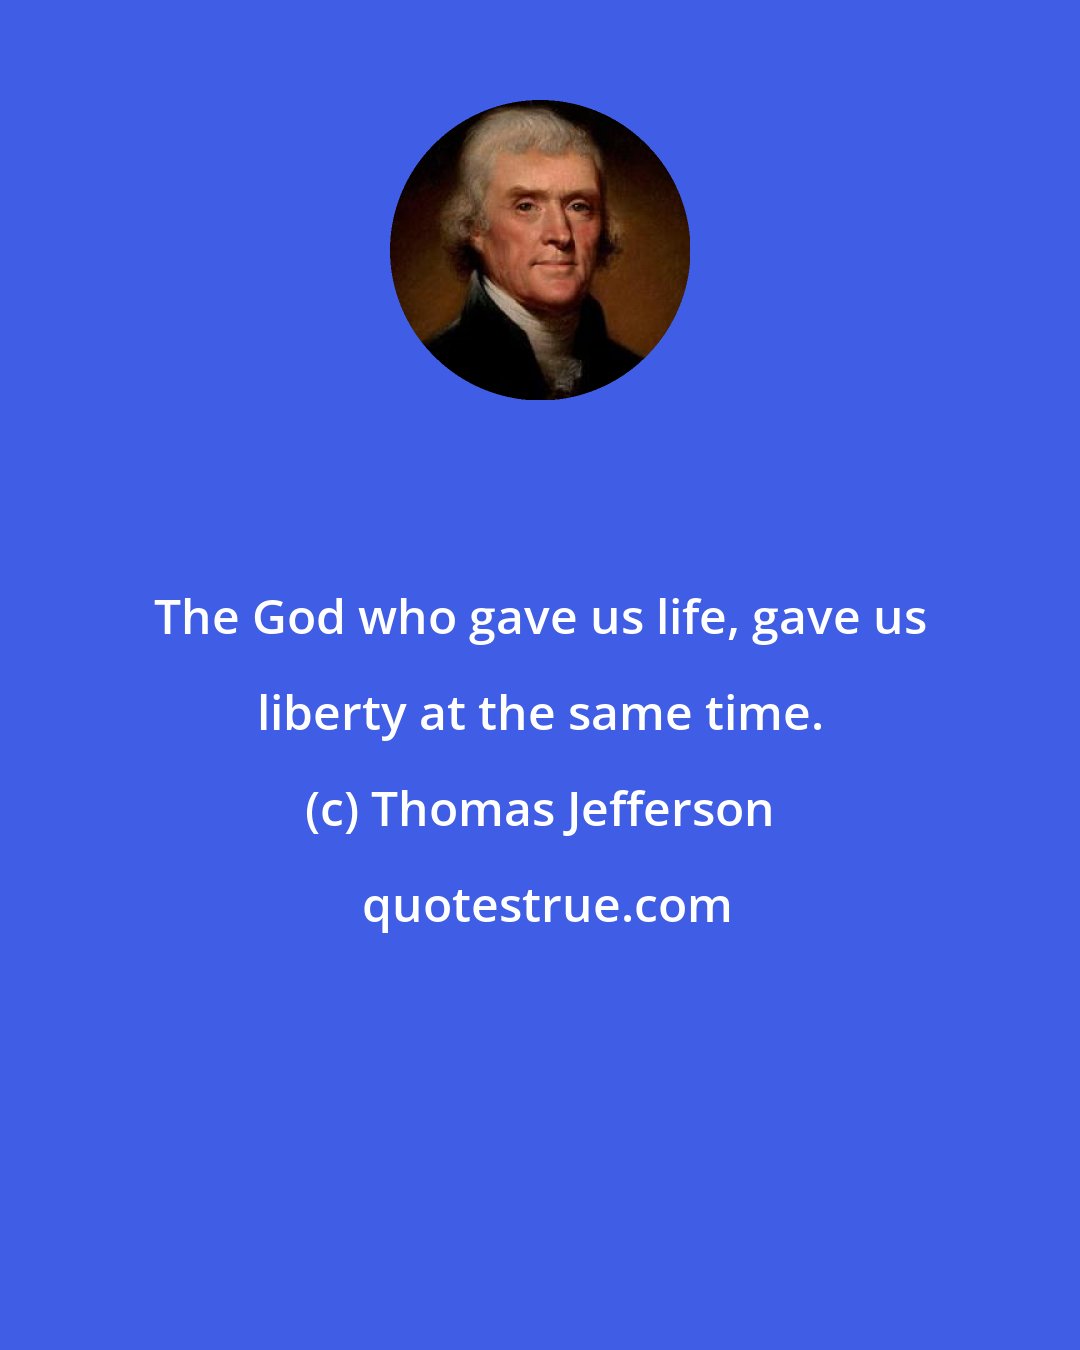 Thomas Jefferson: The God who gave us life, gave us liberty at the same time.